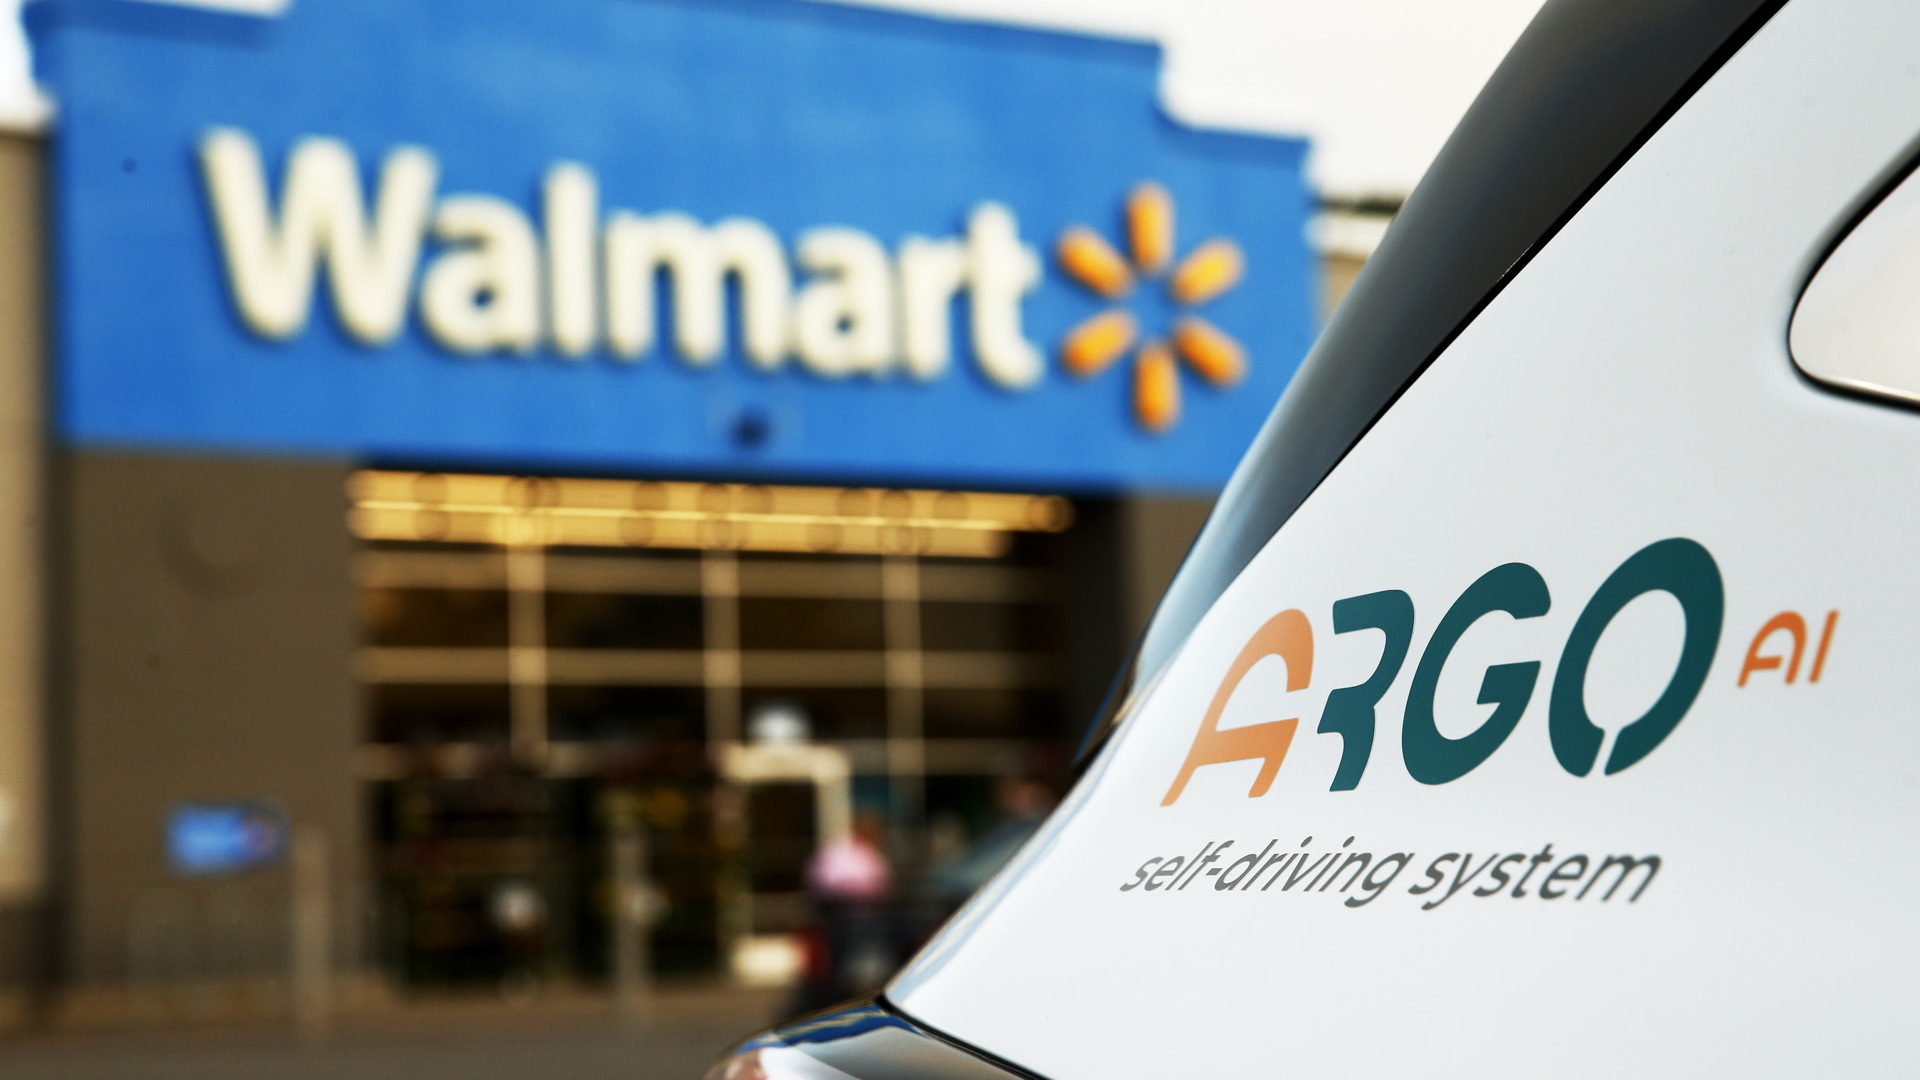 Walmart driverless delivery service with Argo AI and Ford